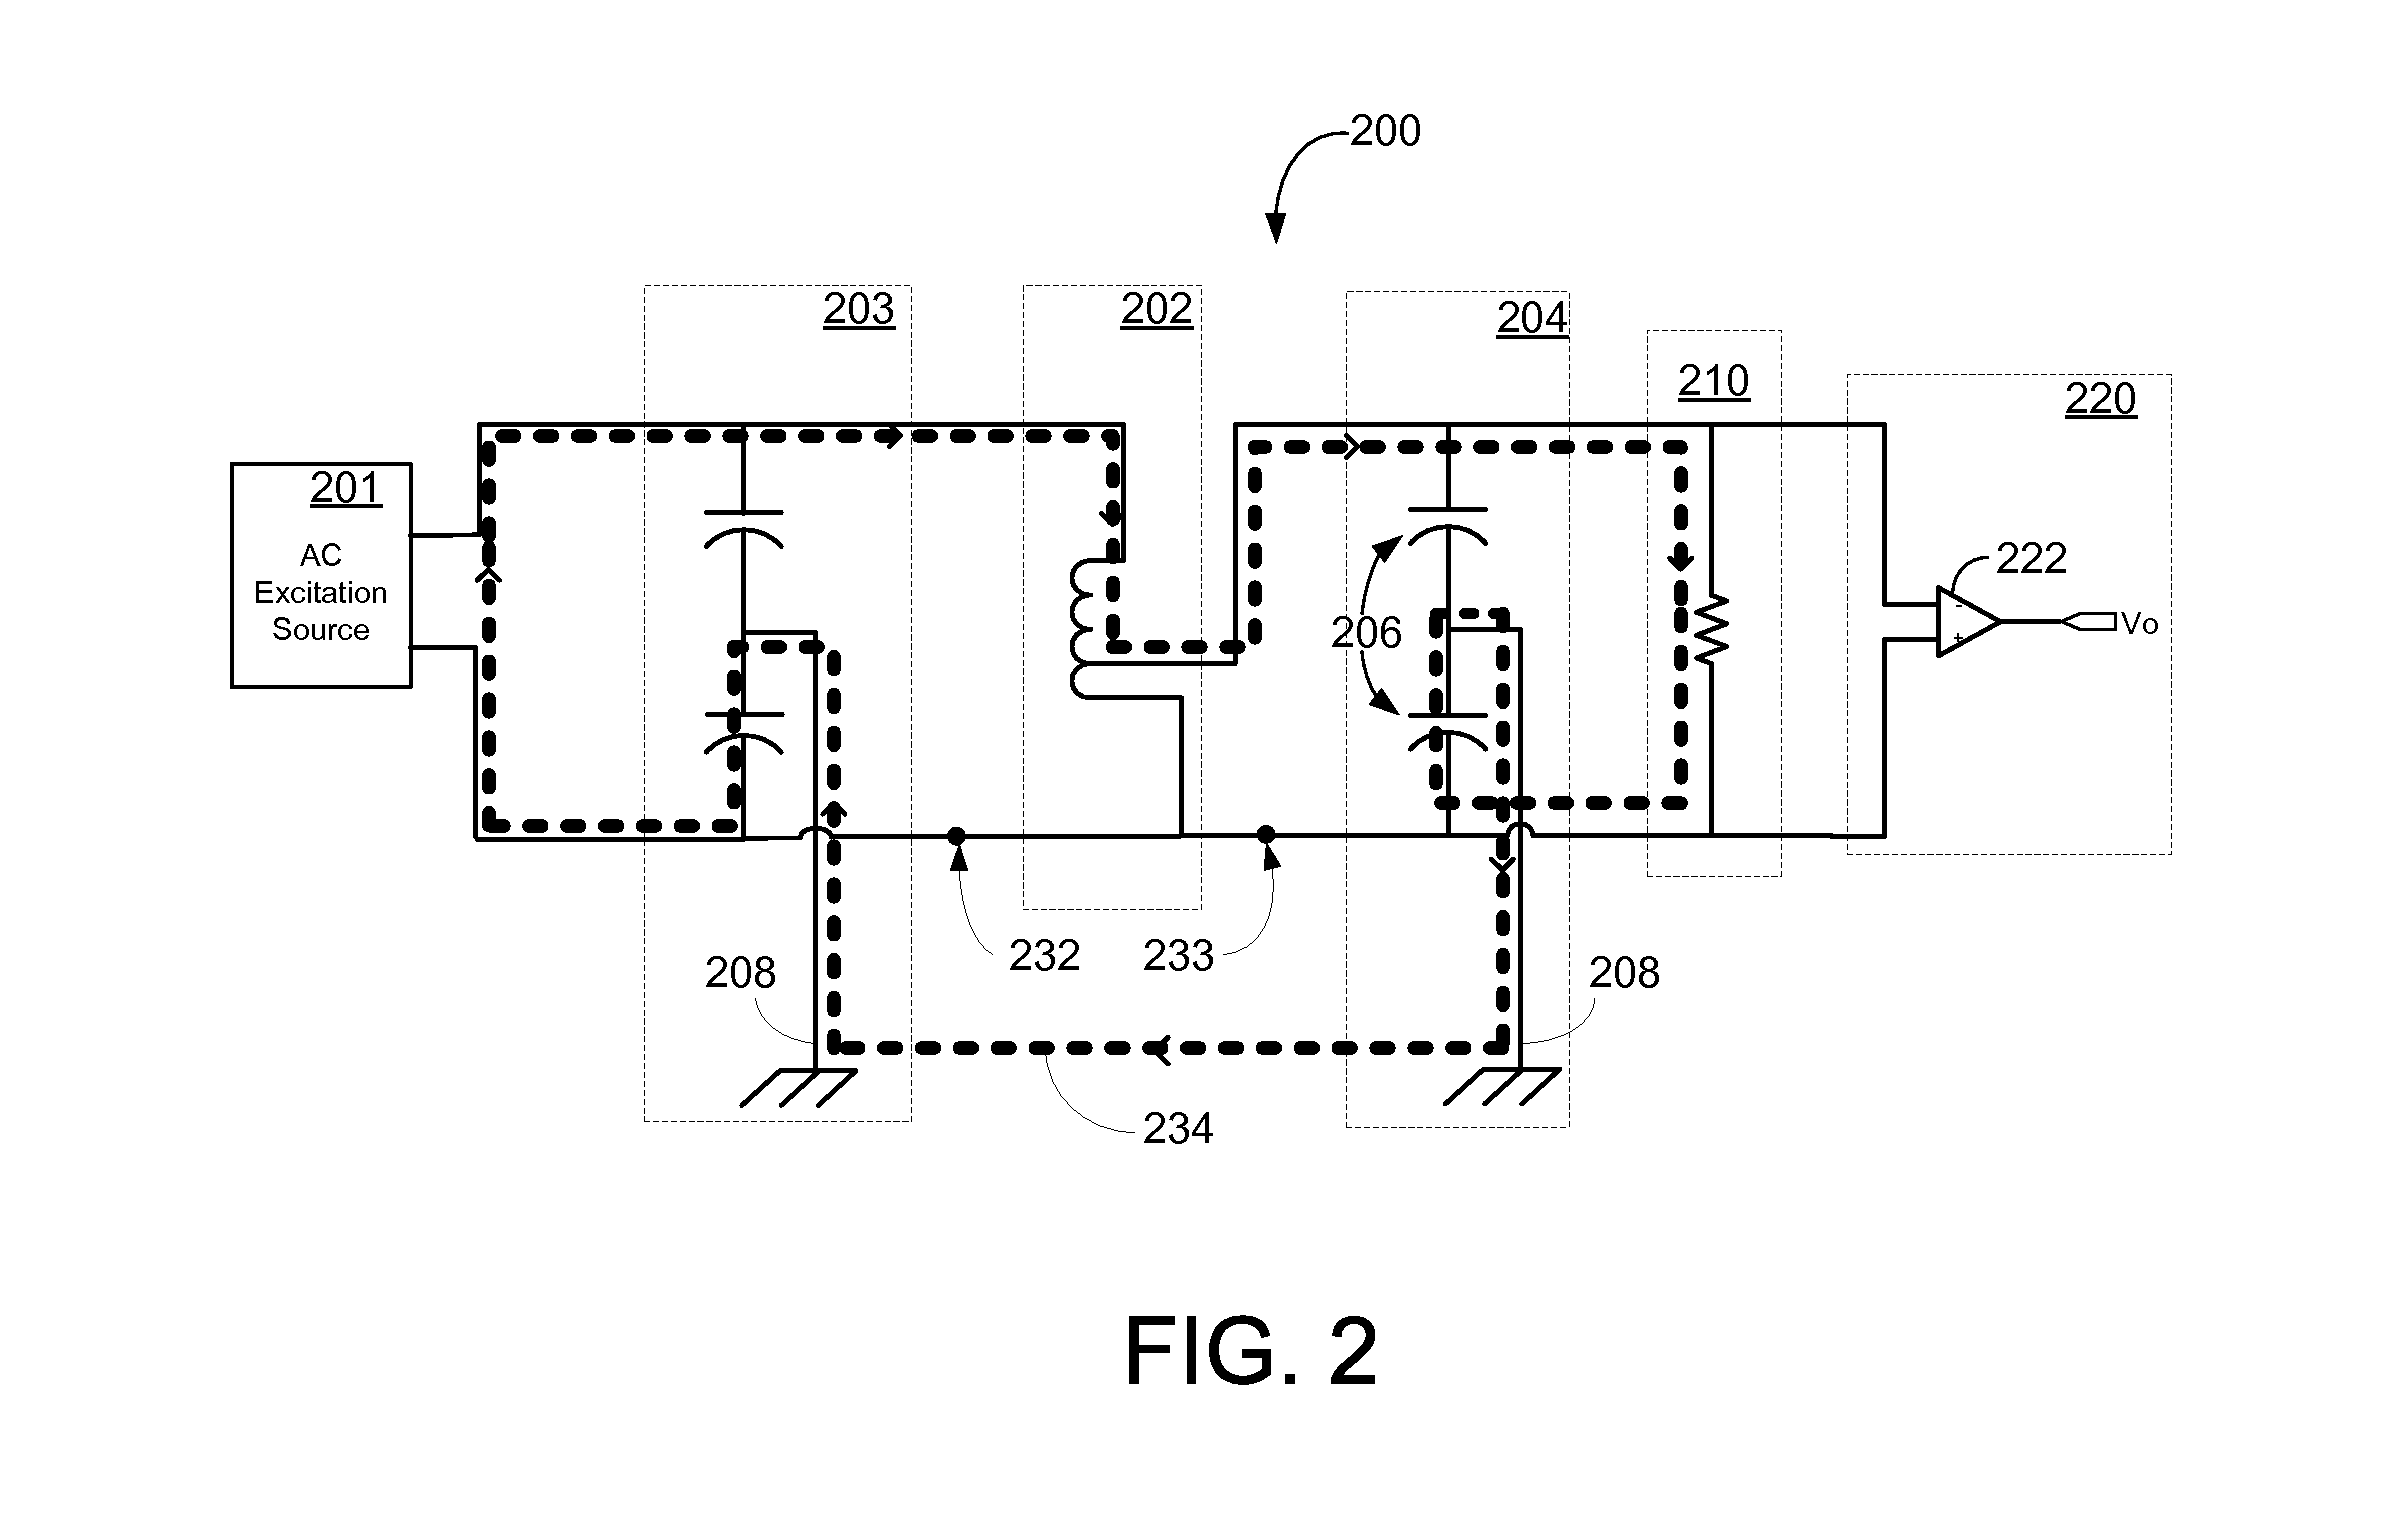 Systems, methods, and apparatus for connection fault self-monitoring with DC bias current